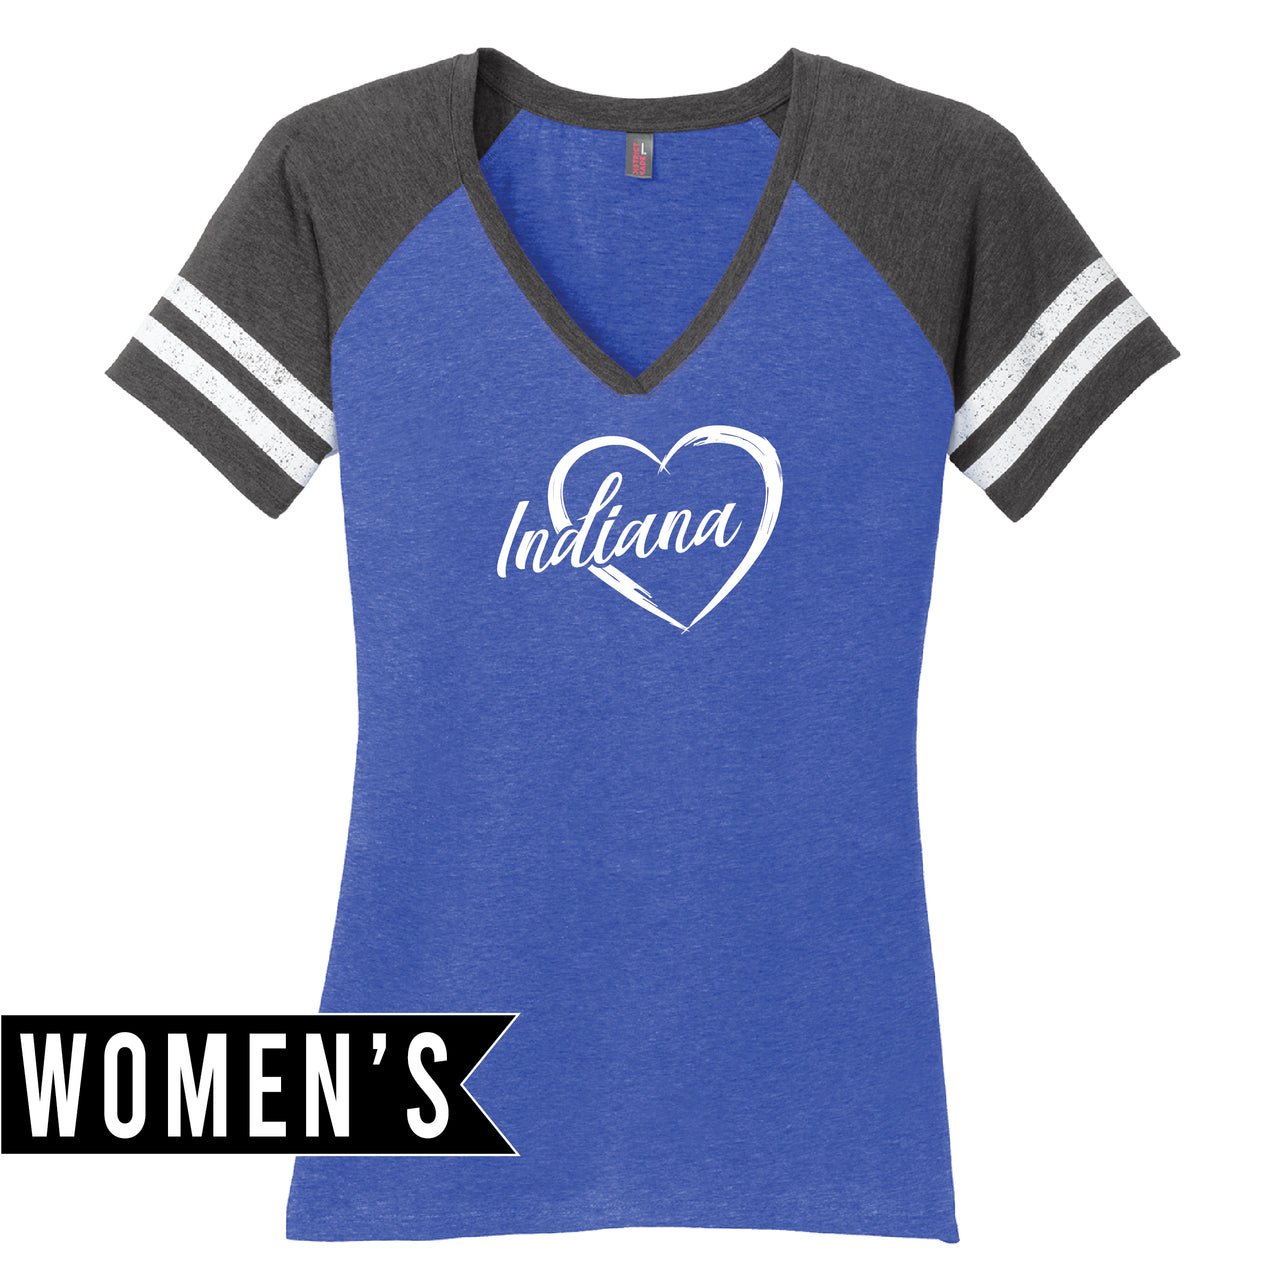 Women’s Game V-Neck Tee - Indiana